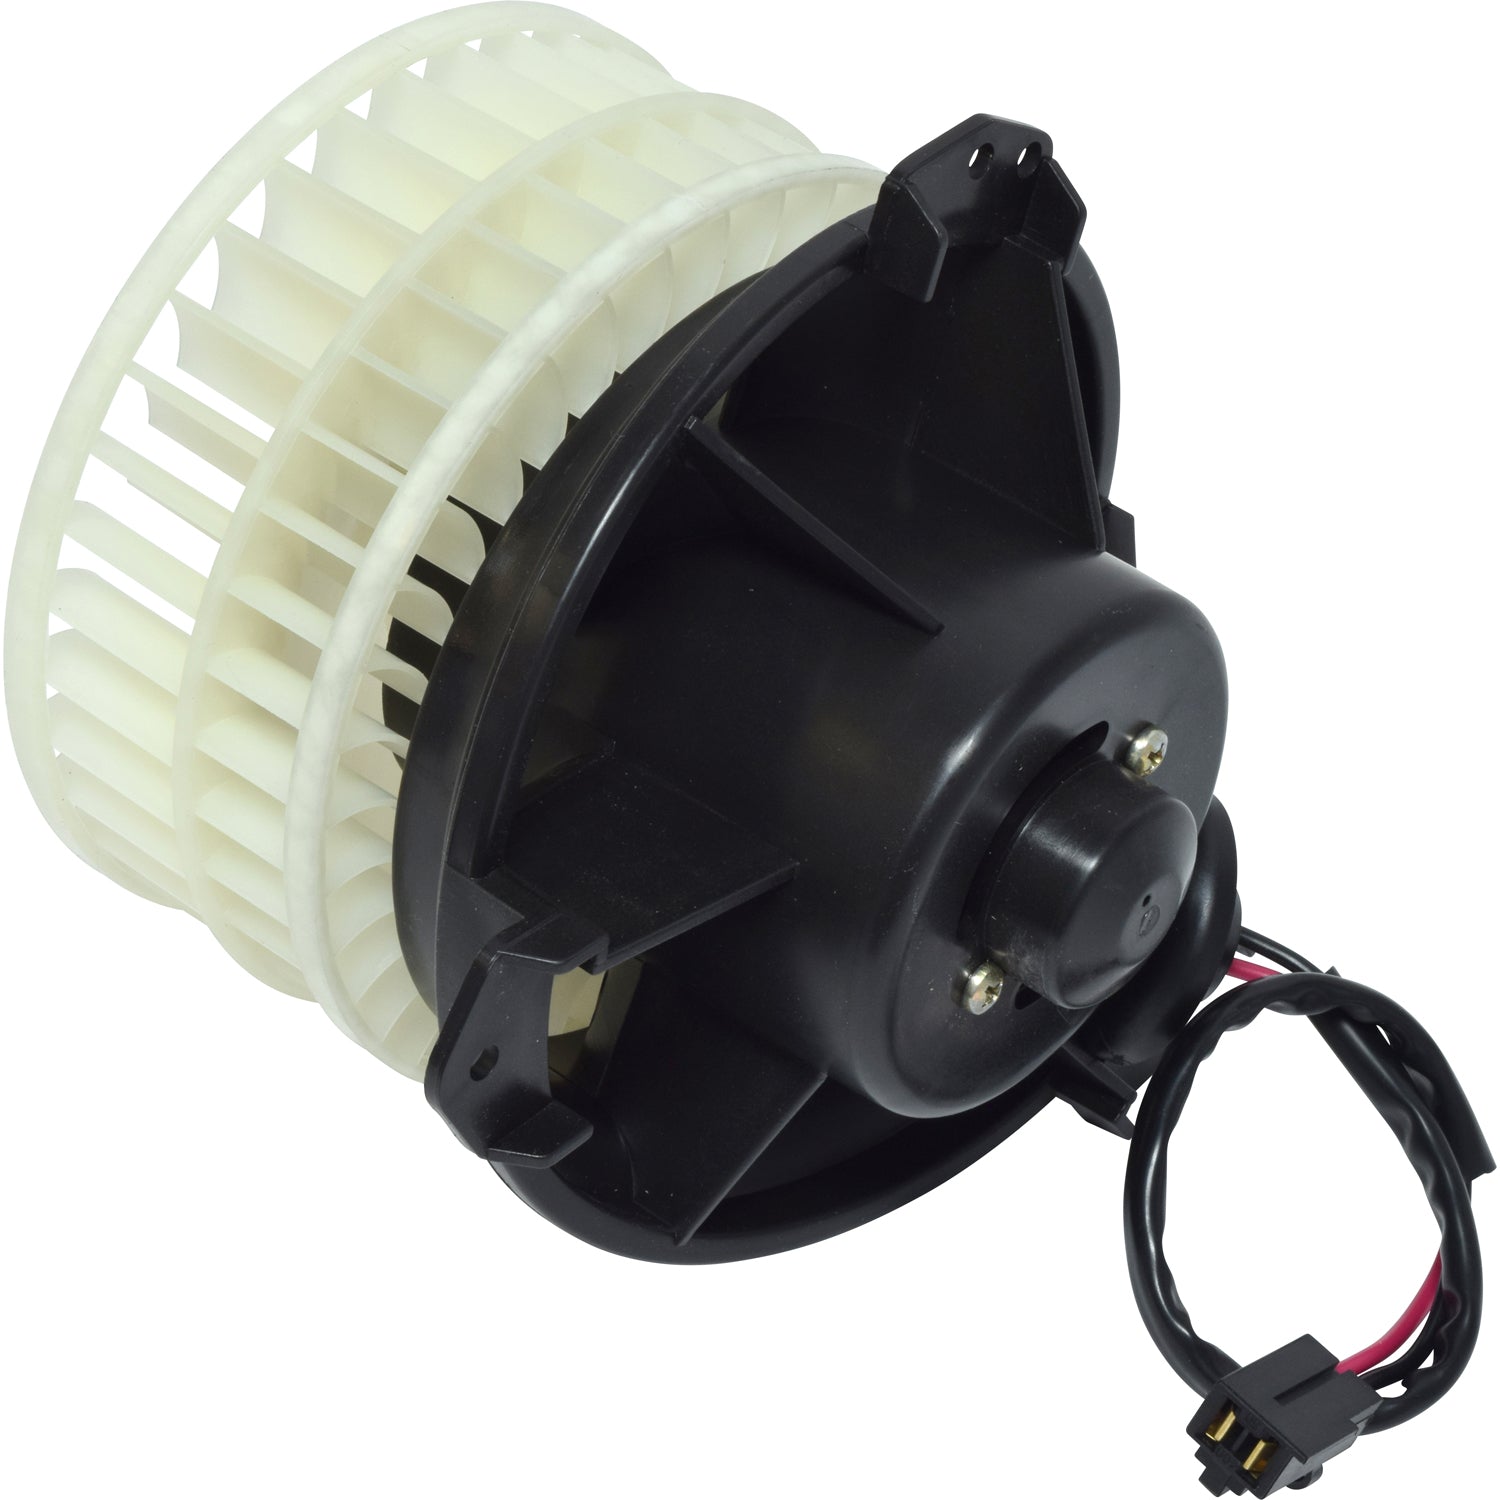 Blower Motor Chrysler Grand Voyager 2000-2002, Pacifica 2008-2004, Town&Country 2007-2001, Dodge Caravan 2001-2007 